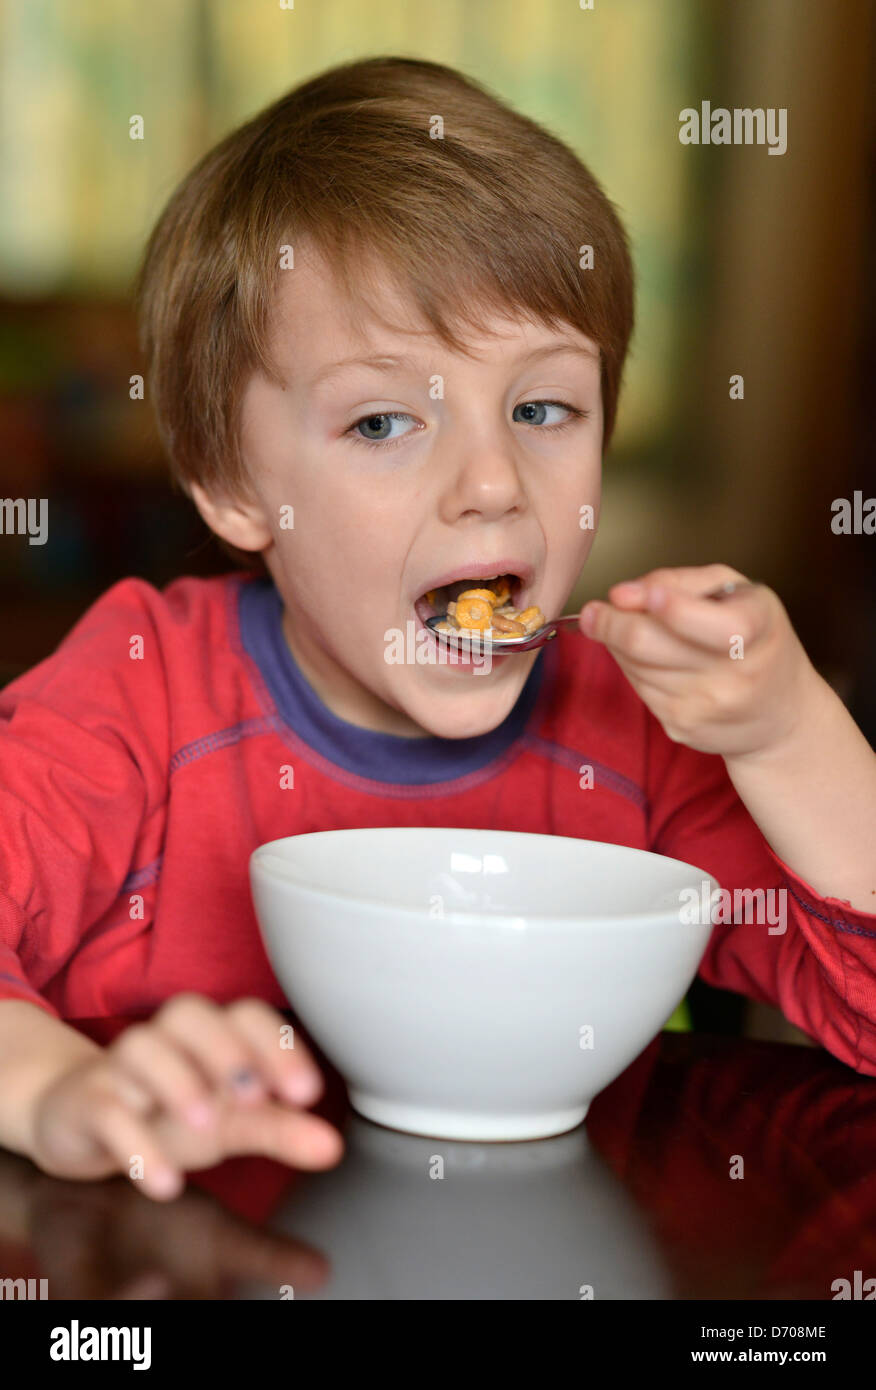 A boy aged five years old, eating a bowl of cereal. Stock Photo